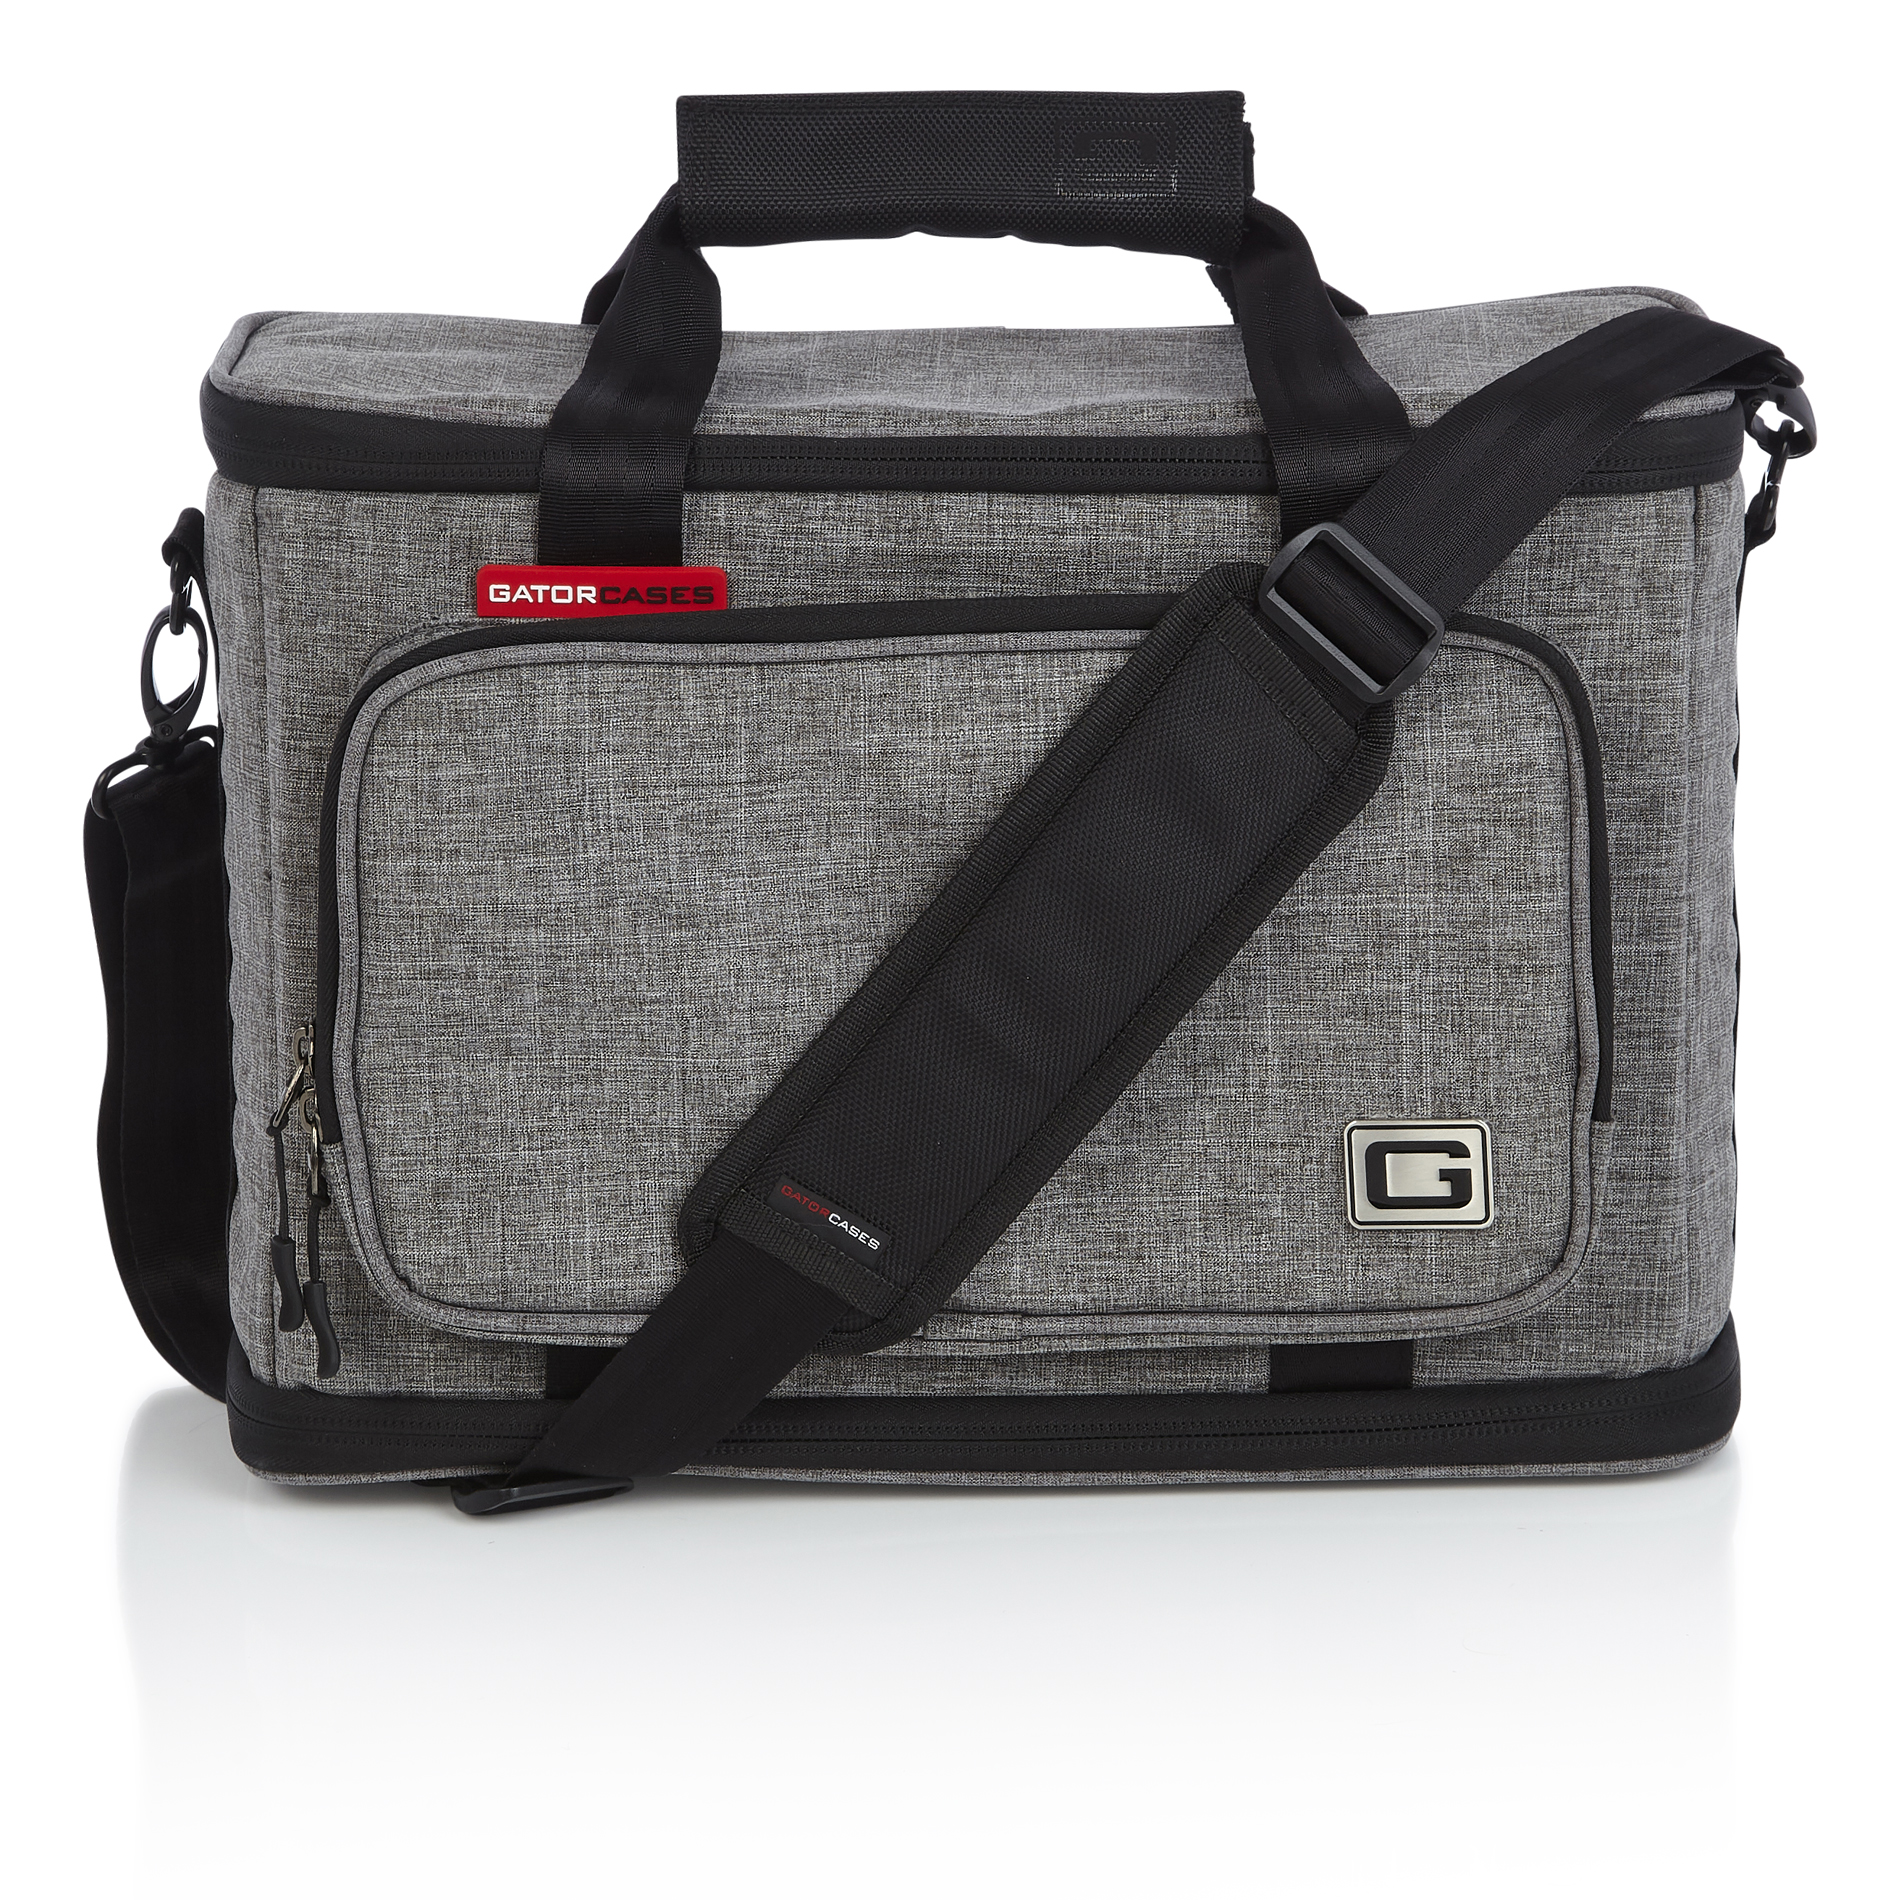 Transit Style Bag For Universal Ox-GT-UNIVERSALOX